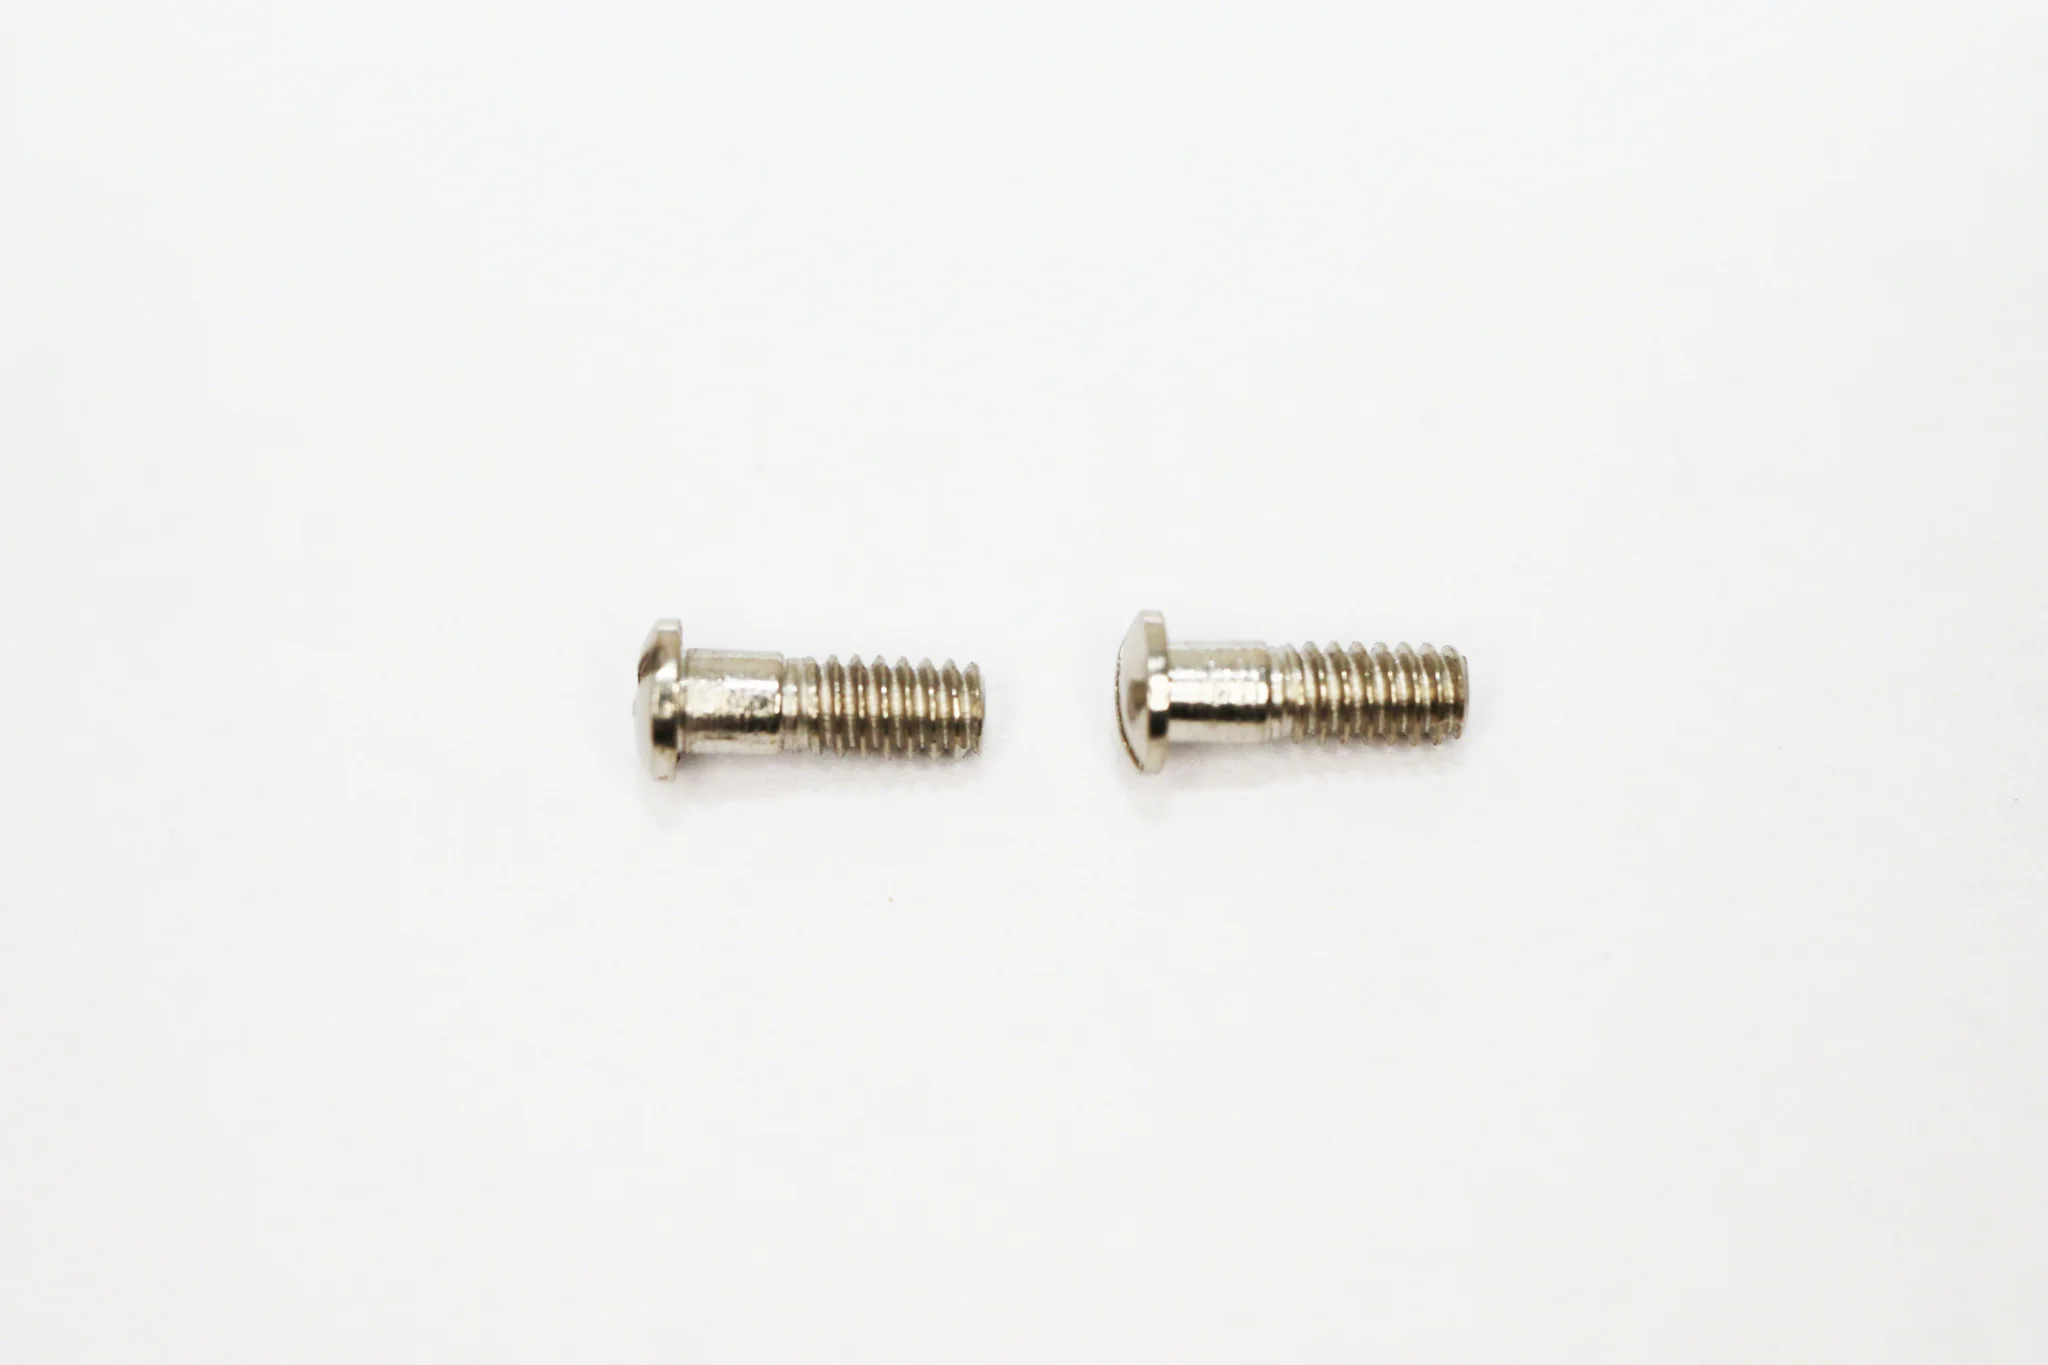 Ray Ban Replacement Screws